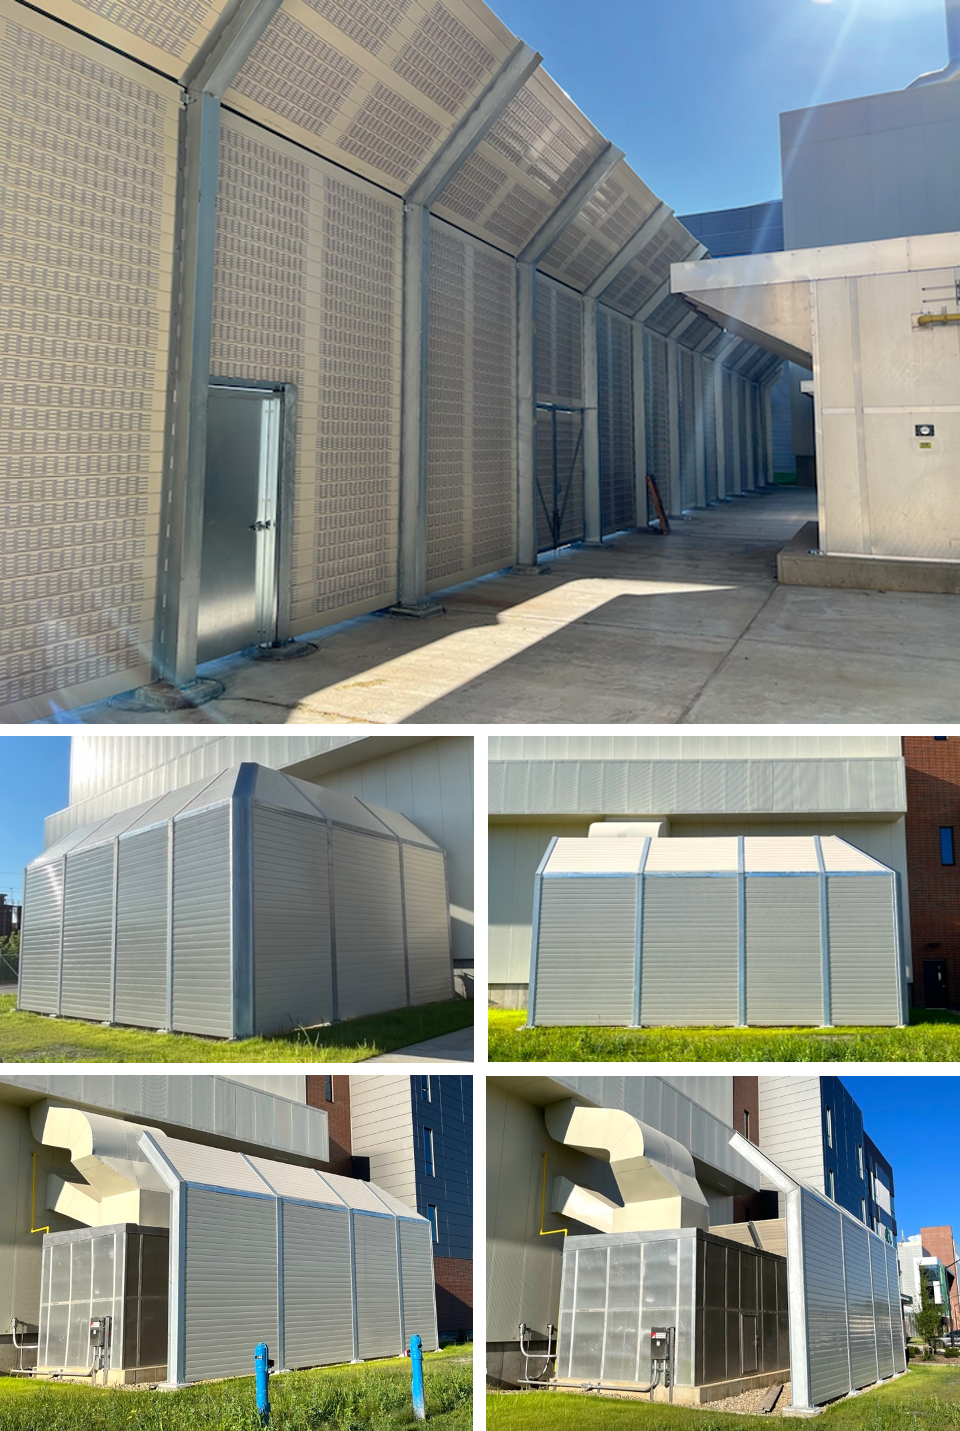  Multiple views of angle-top noise barrier wall equipment enclosure